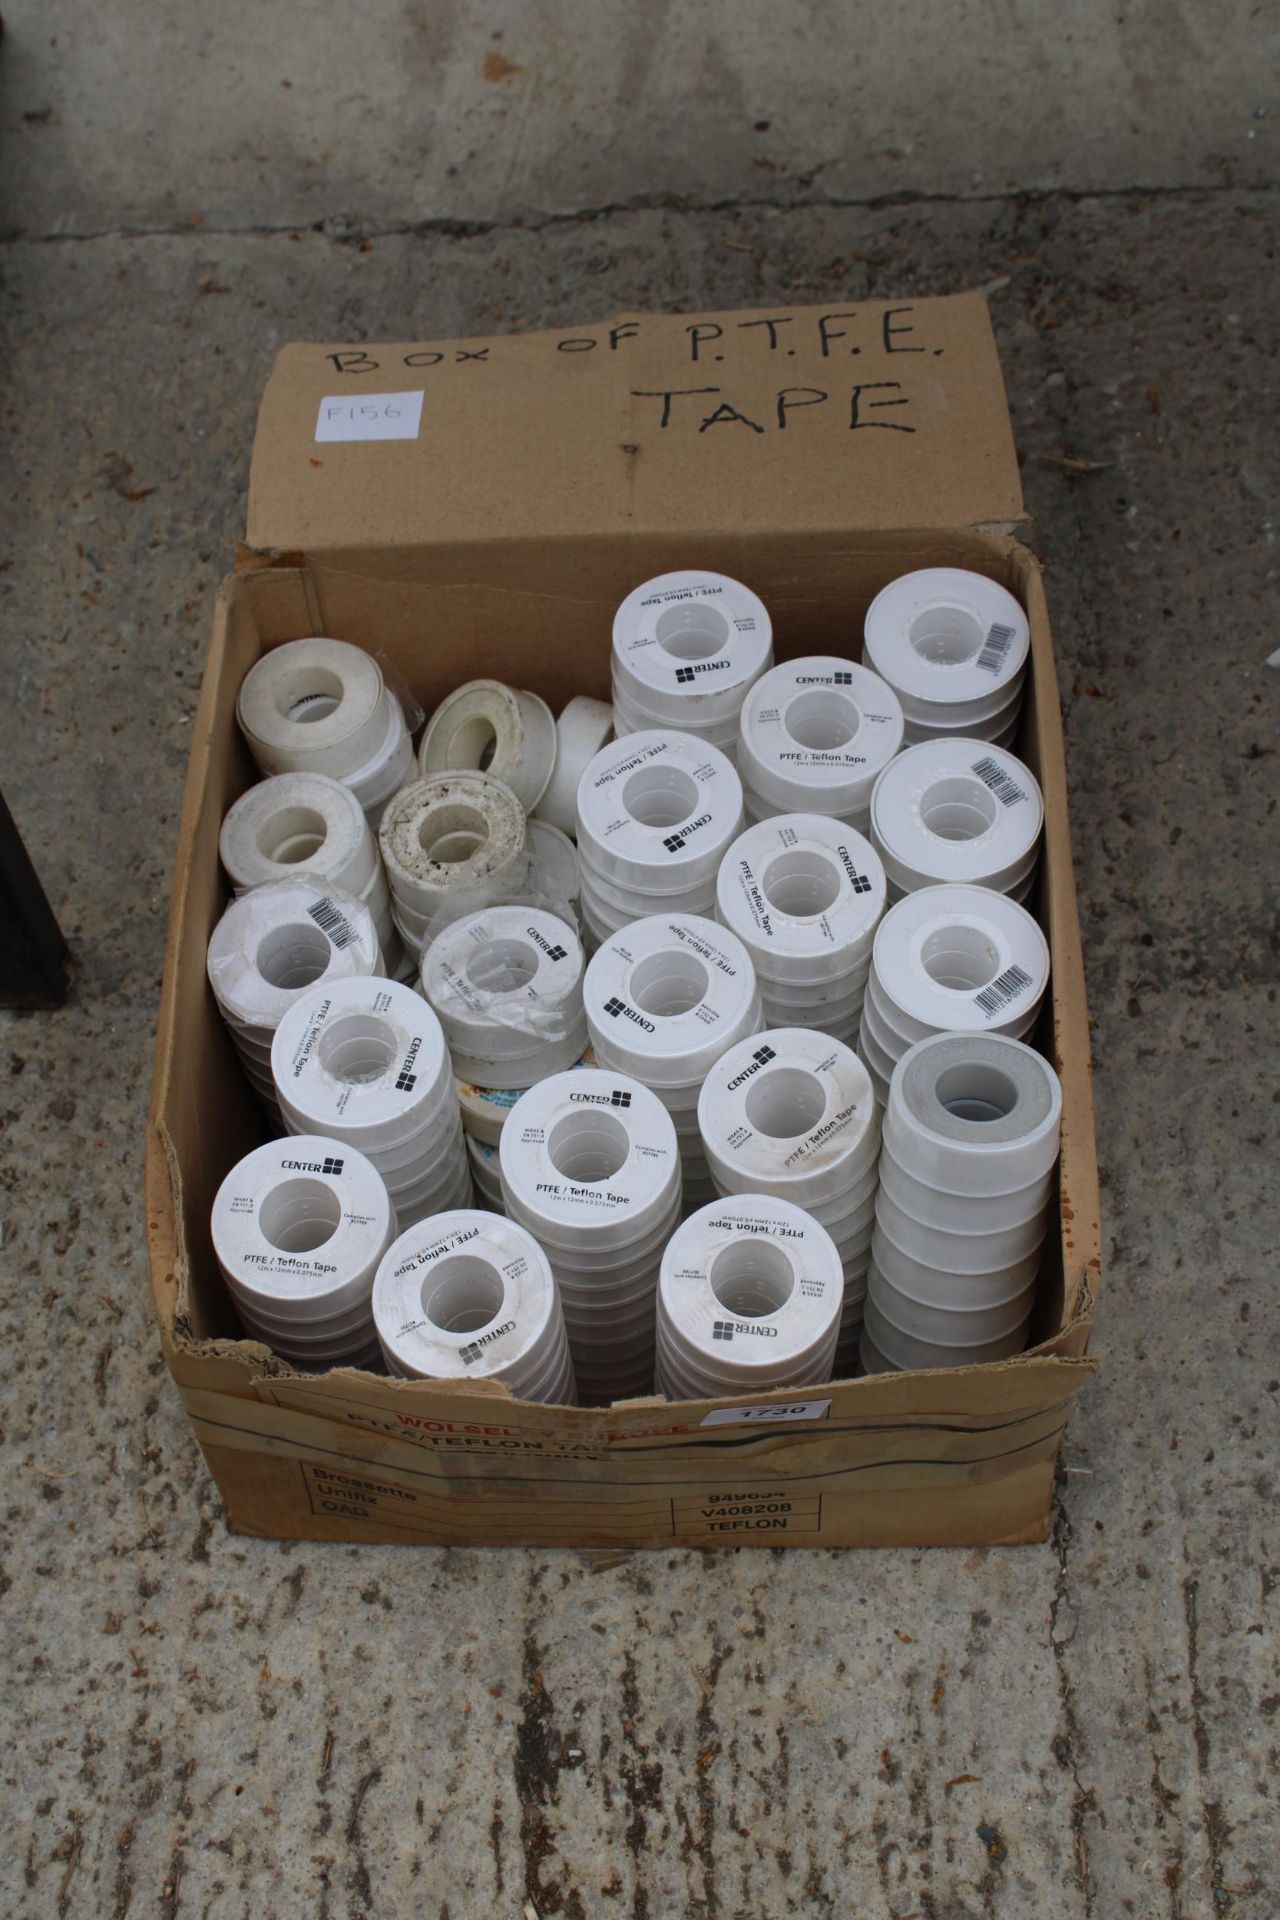 A LARGE QUANTITY OF PTFE TAPE